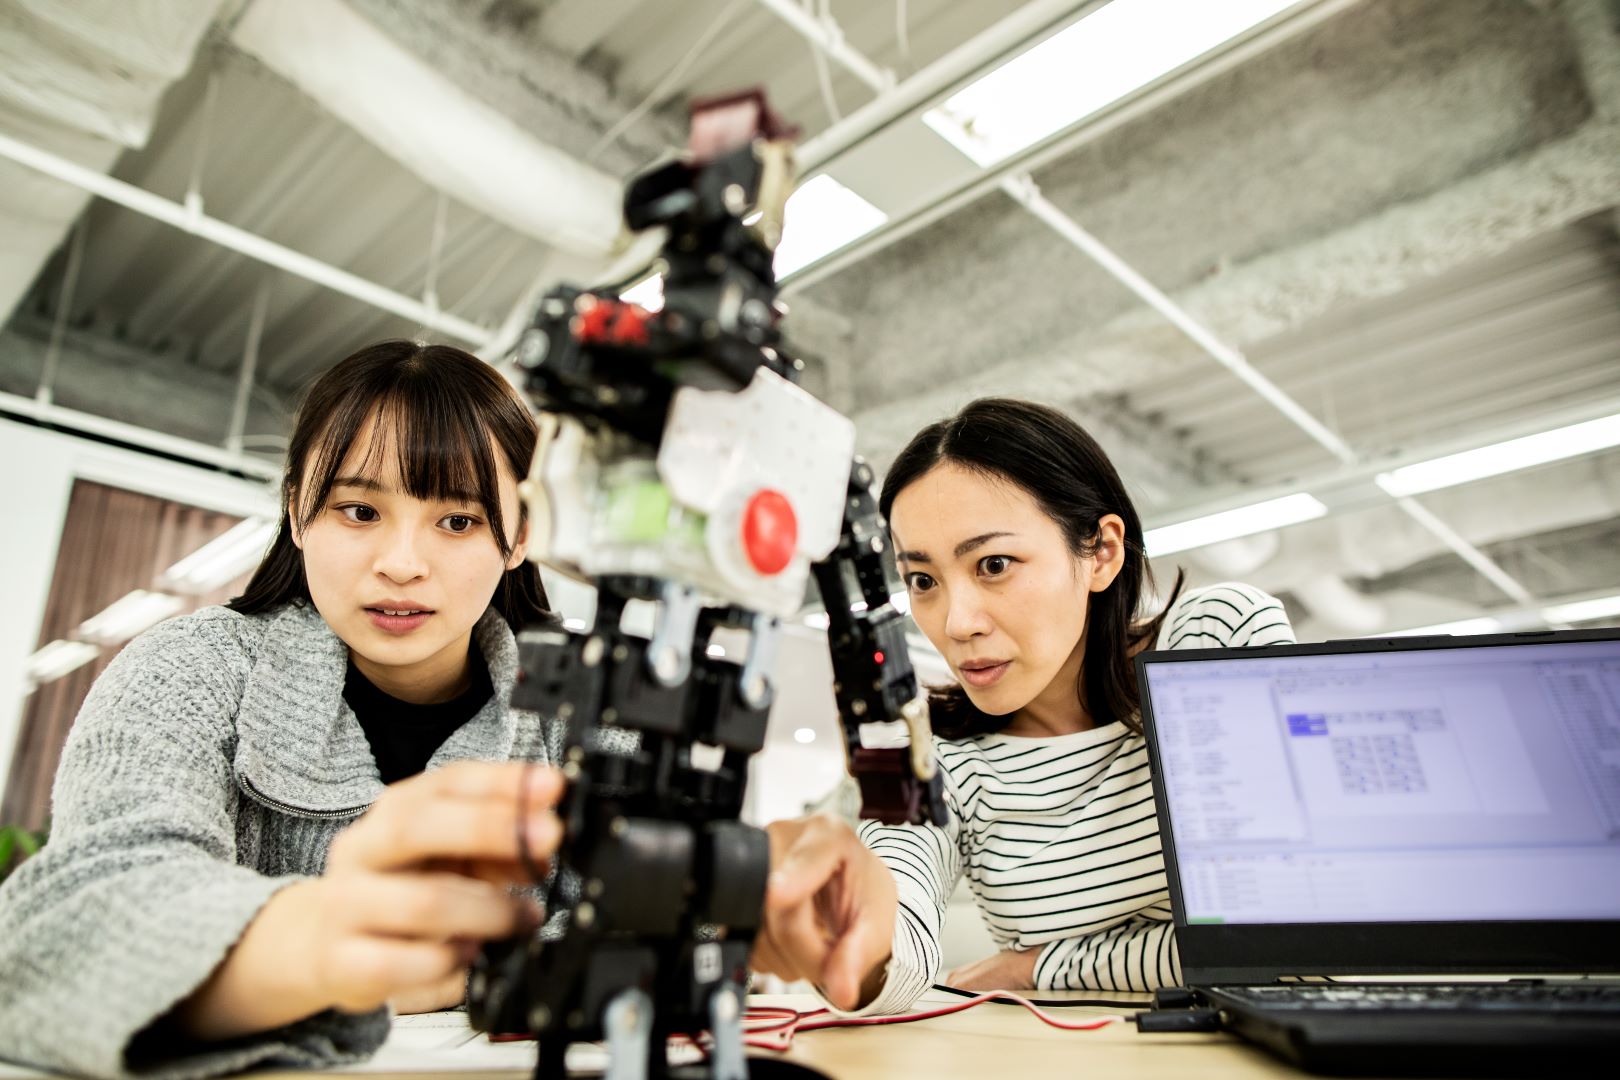 Two women working on a robotic device